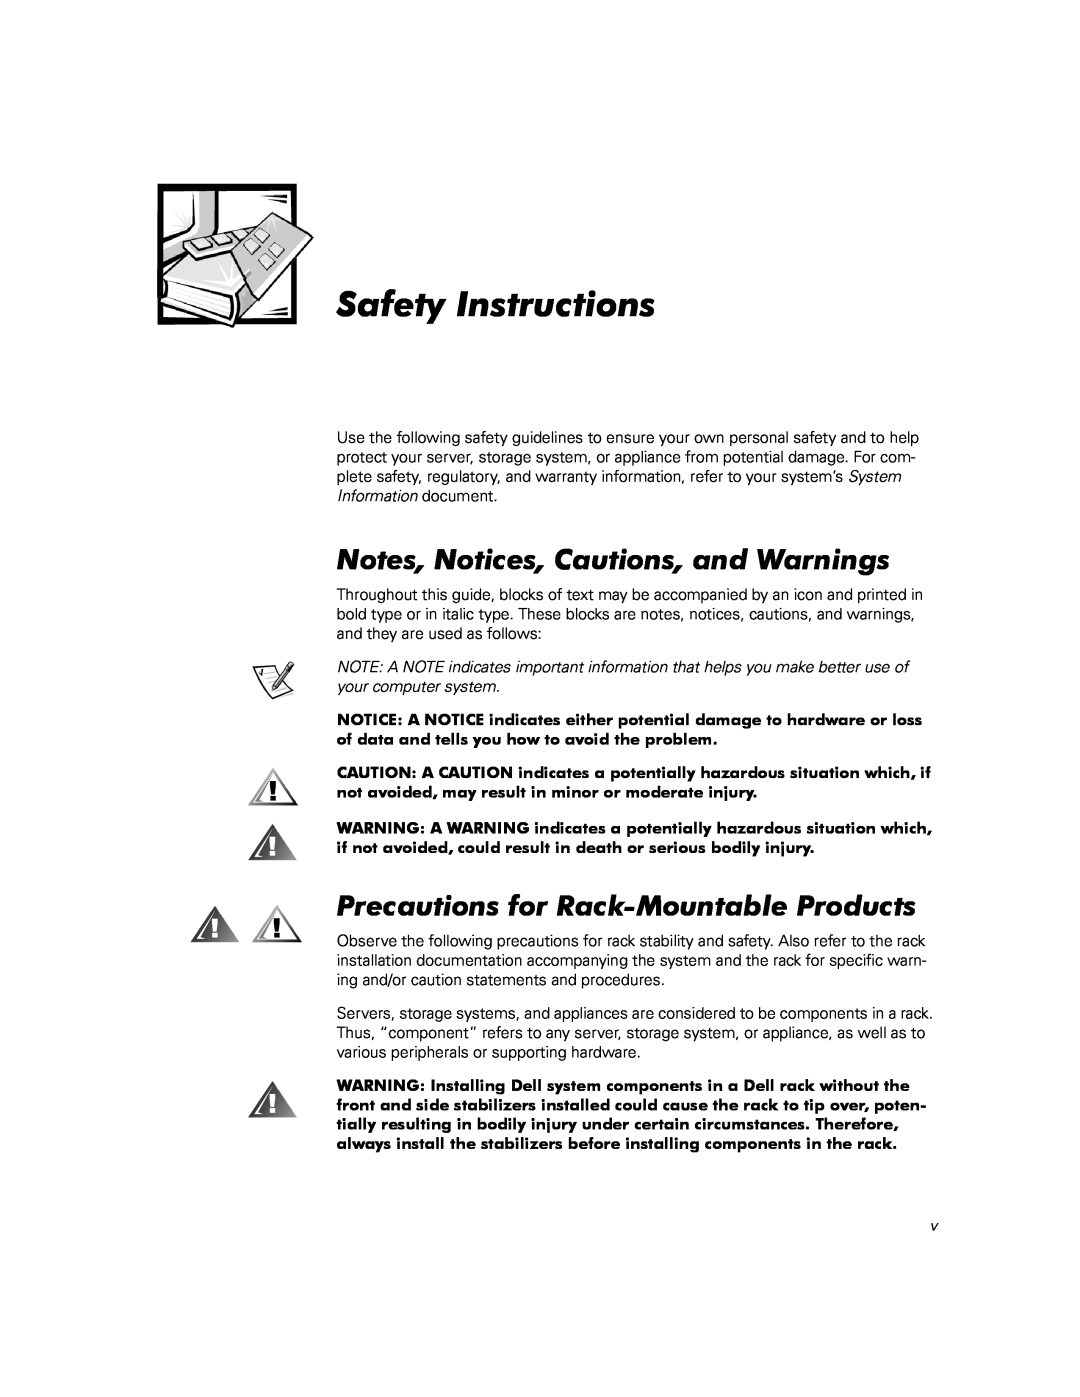 Dell 110, 350, 100 manual Safety Instructions, Notes, Notices, Cautions, and Warnings, Precautions for Rack-MountableProducts 